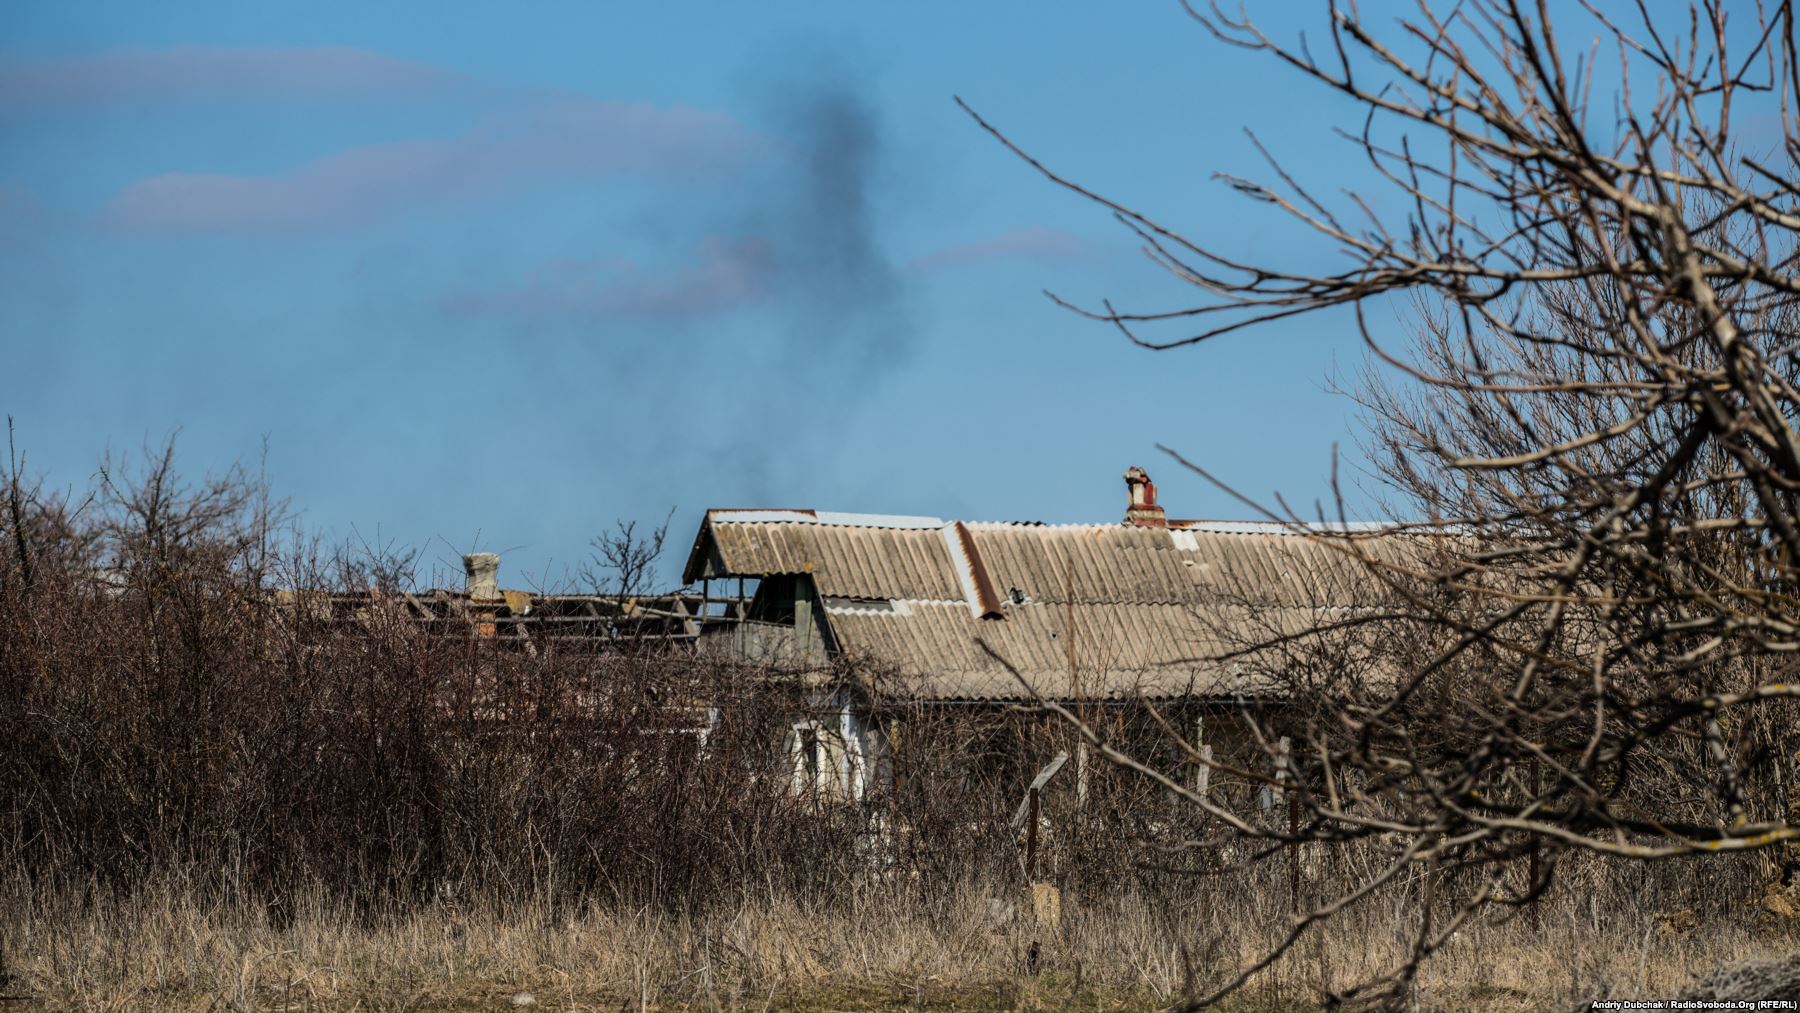 As RFE/RL photojournalist Andriy Dubchak walked through Vodyane on March 26, a series of explosions, followed by an intense burst of shooting broke out on the outskirts of the village. As Dubchak watched, this column of smoke drifted into the sky. 